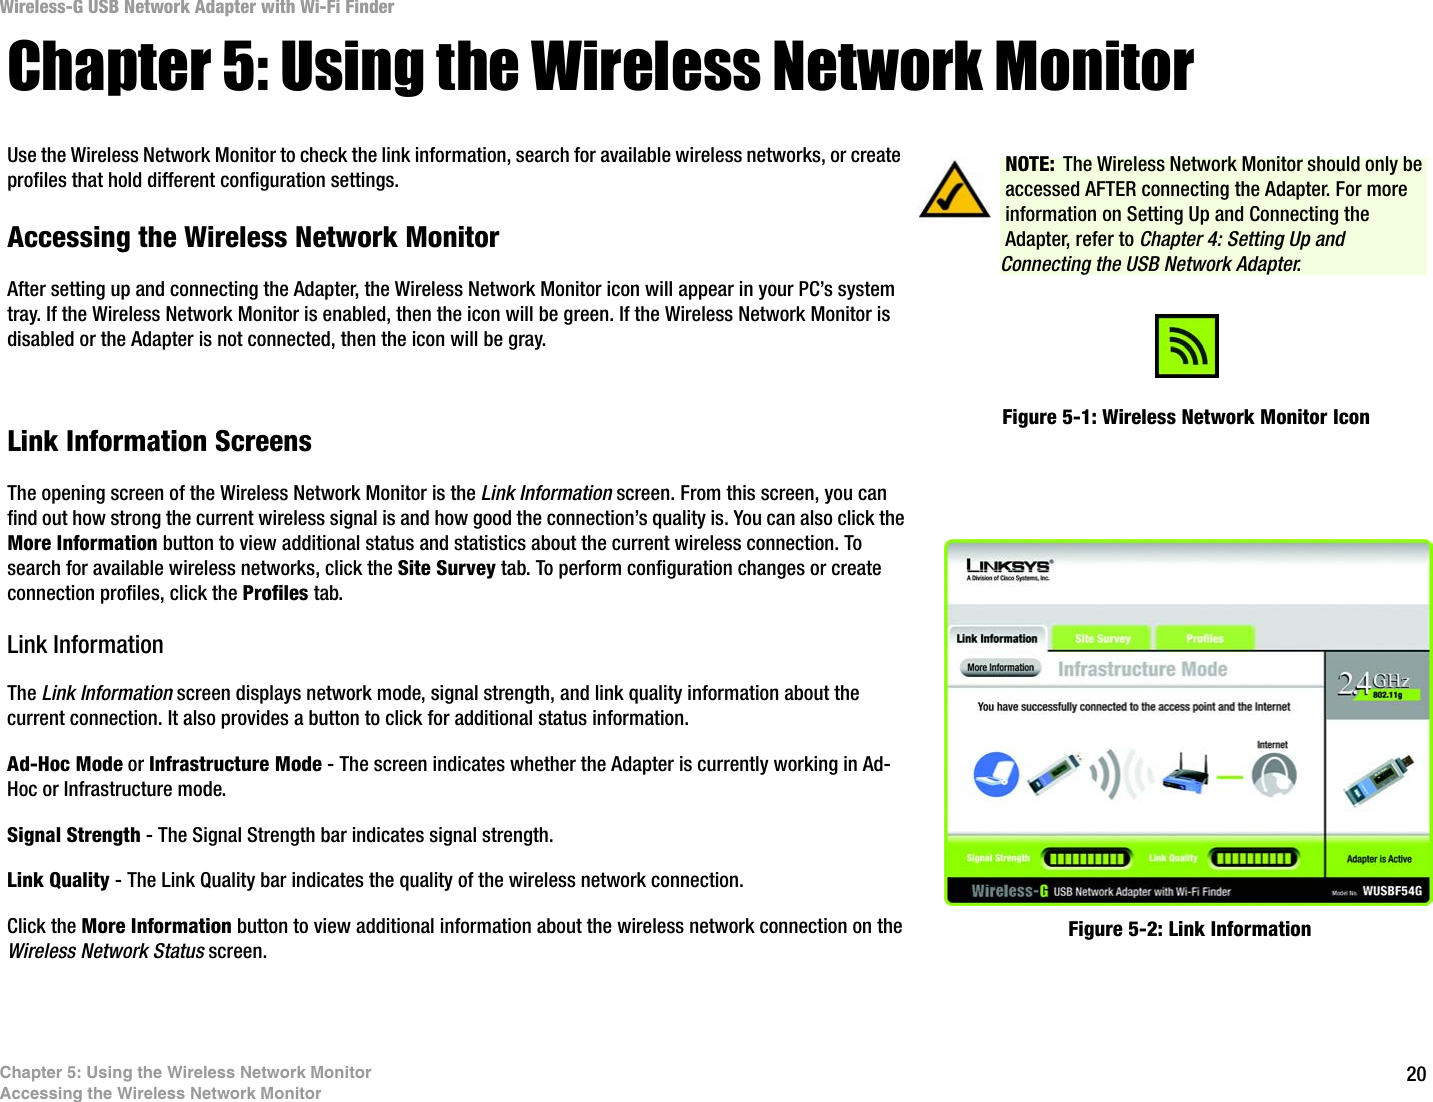 20Chapter 5: Using the Wireless Network MonitorAccessing the Wireless Network MonitorWireless-G USB Network Adapter with Wi-Fi FinderChapter 5: Using the Wireless Network MonitorUse the Wireless Network Monitor to check the link information, search for available wireless networks, or create profiles that hold different configuration settings.Accessing the Wireless Network MonitorAfter setting up and connecting the Adapter, the Wireless Network Monitor icon will appear in your PC’s system tray. If the Wireless Network Monitor is enabled, then the icon will be green. If the Wireless Network Monitor is disabled or the Adapter is not connected, then the icon will be gray.Link Information ScreensThe opening screen of the Wireless Network Monitor is the Link Information screen. From this screen, you can find out how strong the current wireless signal is and how good the connection’s quality is. You can also click the More Information button to view additional status and statistics about the current wireless connection. To search for available wireless networks, click the Site Survey tab. To perform configuration changes or create connection profiles, click the Profiles tab.Link InformationThe Link Information screen displays network mode, signal strength, and link quality information about the current connection. It also provides a button to click for additional status information.Ad-Hoc Mode or Infrastructure Mode - The screen indicates whether the Adapter is currently working in Ad-Hoc or Infrastructure mode.Signal Strength - The Signal Strength bar indicates signal strength. Link Quality - The Link Quality bar indicates the quality of the wireless network connection.Click the More Information button to view additional information about the wireless network connection on the Wireless Network Status screen.Figure 5-1: Wireless Network Monitor IconFigure 5-2: Link InformationNOTE: The Wireless Network Monitor should only be accessed AFTER connecting the Adapter. For more information on Setting Up and Connecting the Adapter, refer to Chapter 4: Setting Up and Connecting the USB Network Adapter.